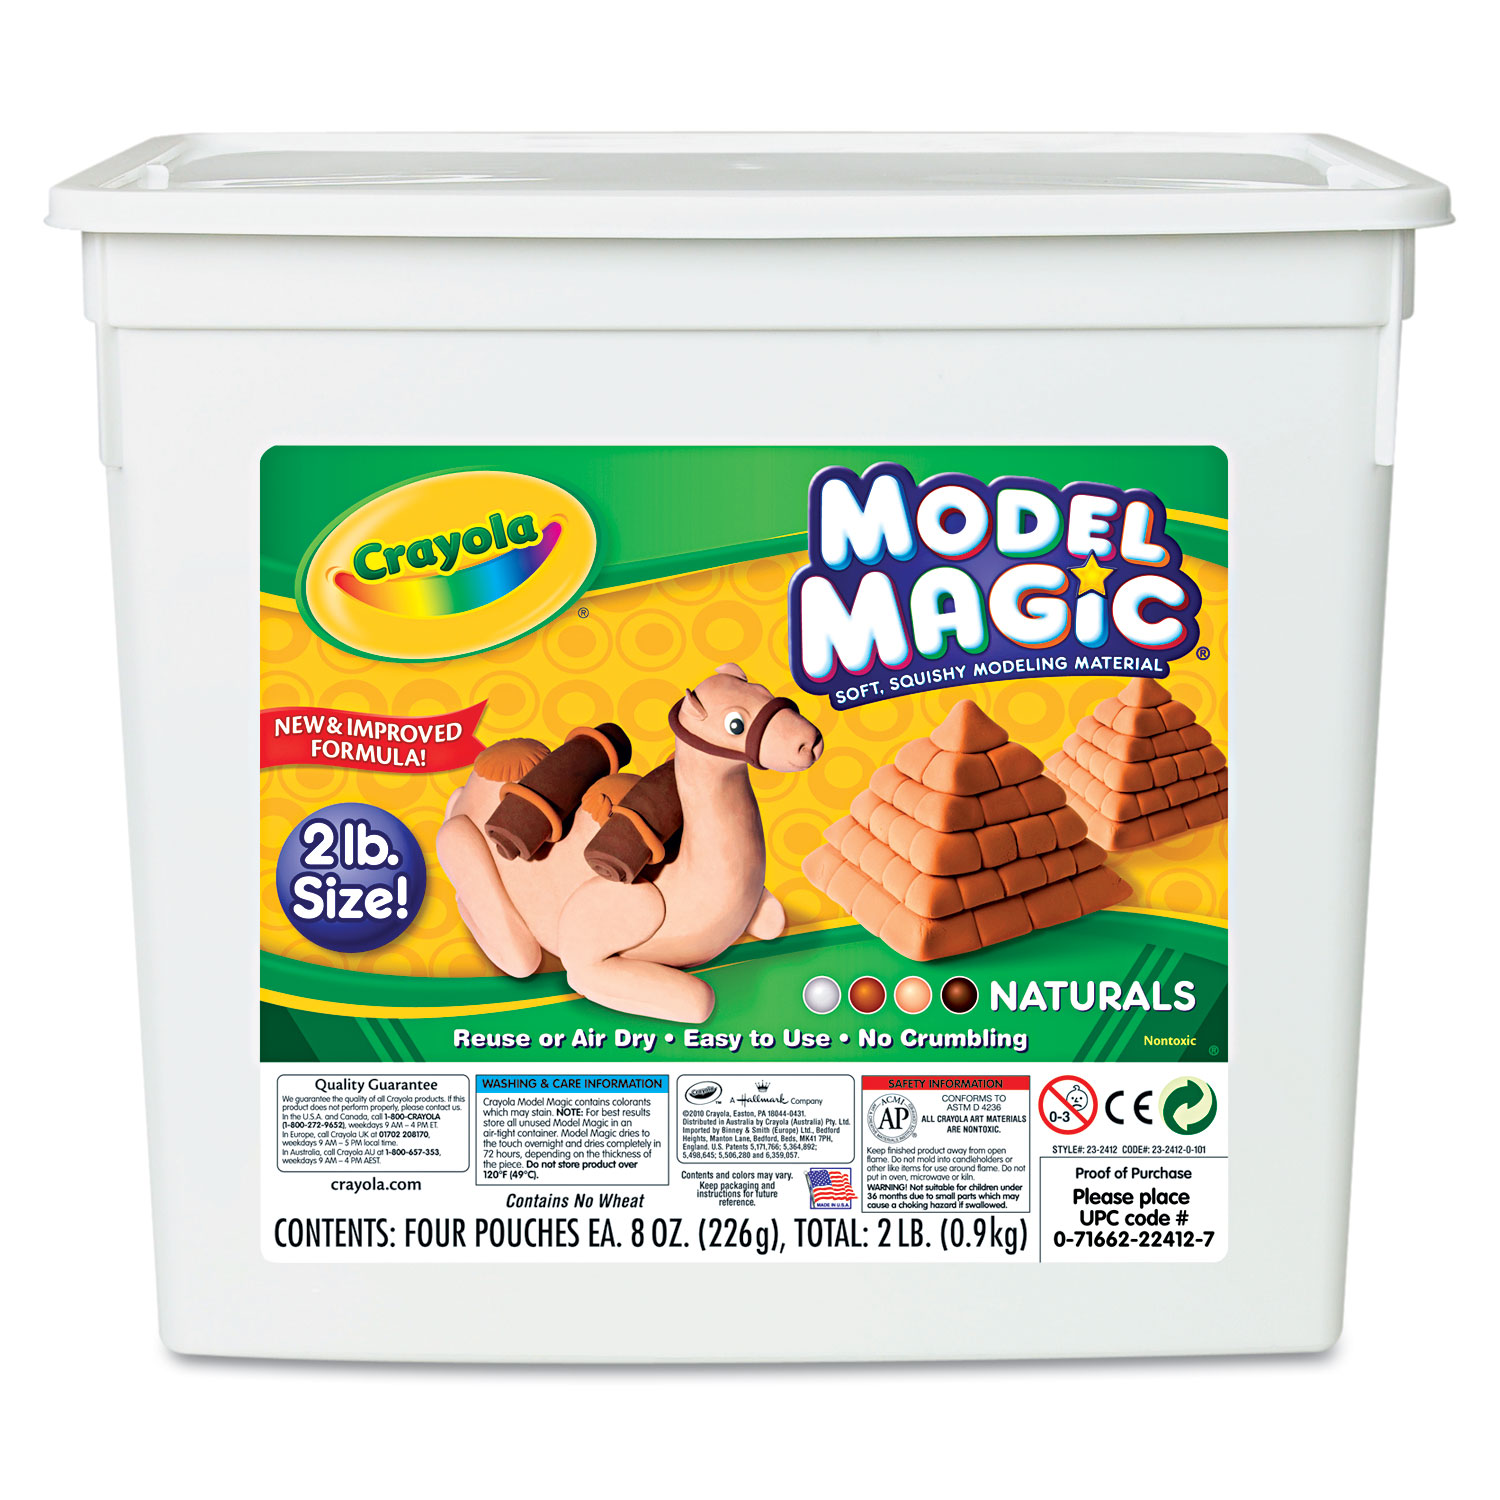 Crayola CYO232412 Model Magic Modeling Compound, Assorted Natural Colors, 2 lbs.